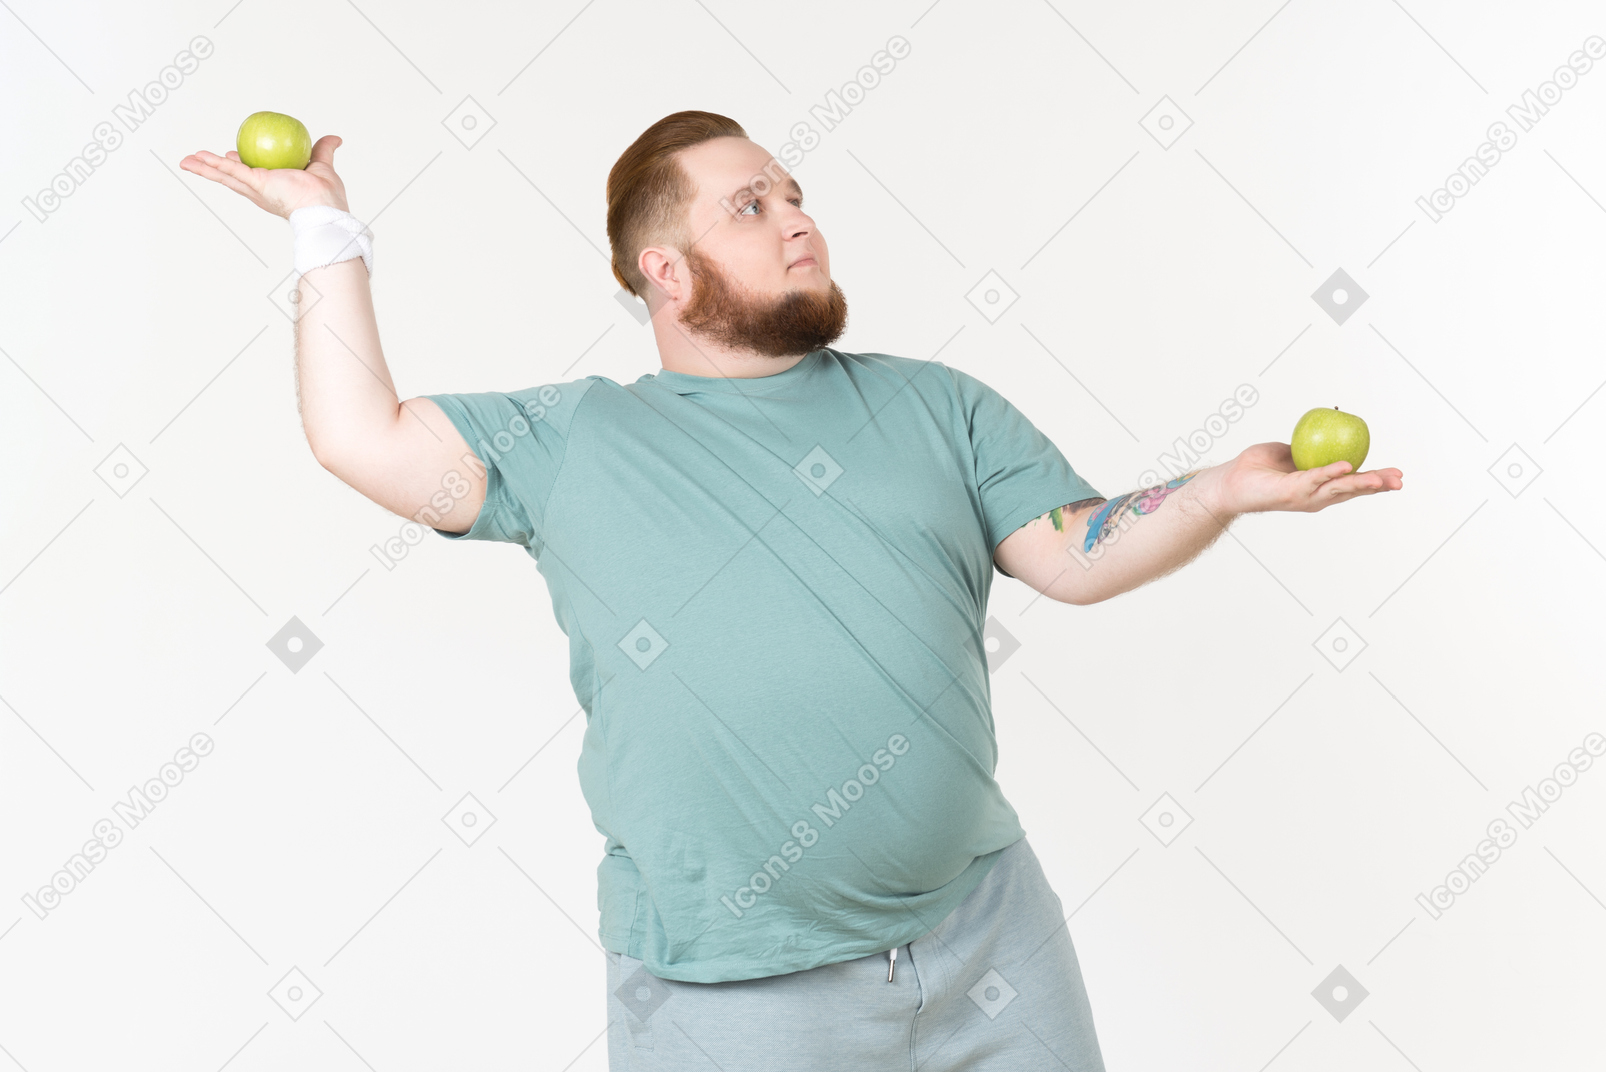 Trying to keep balance with these apples